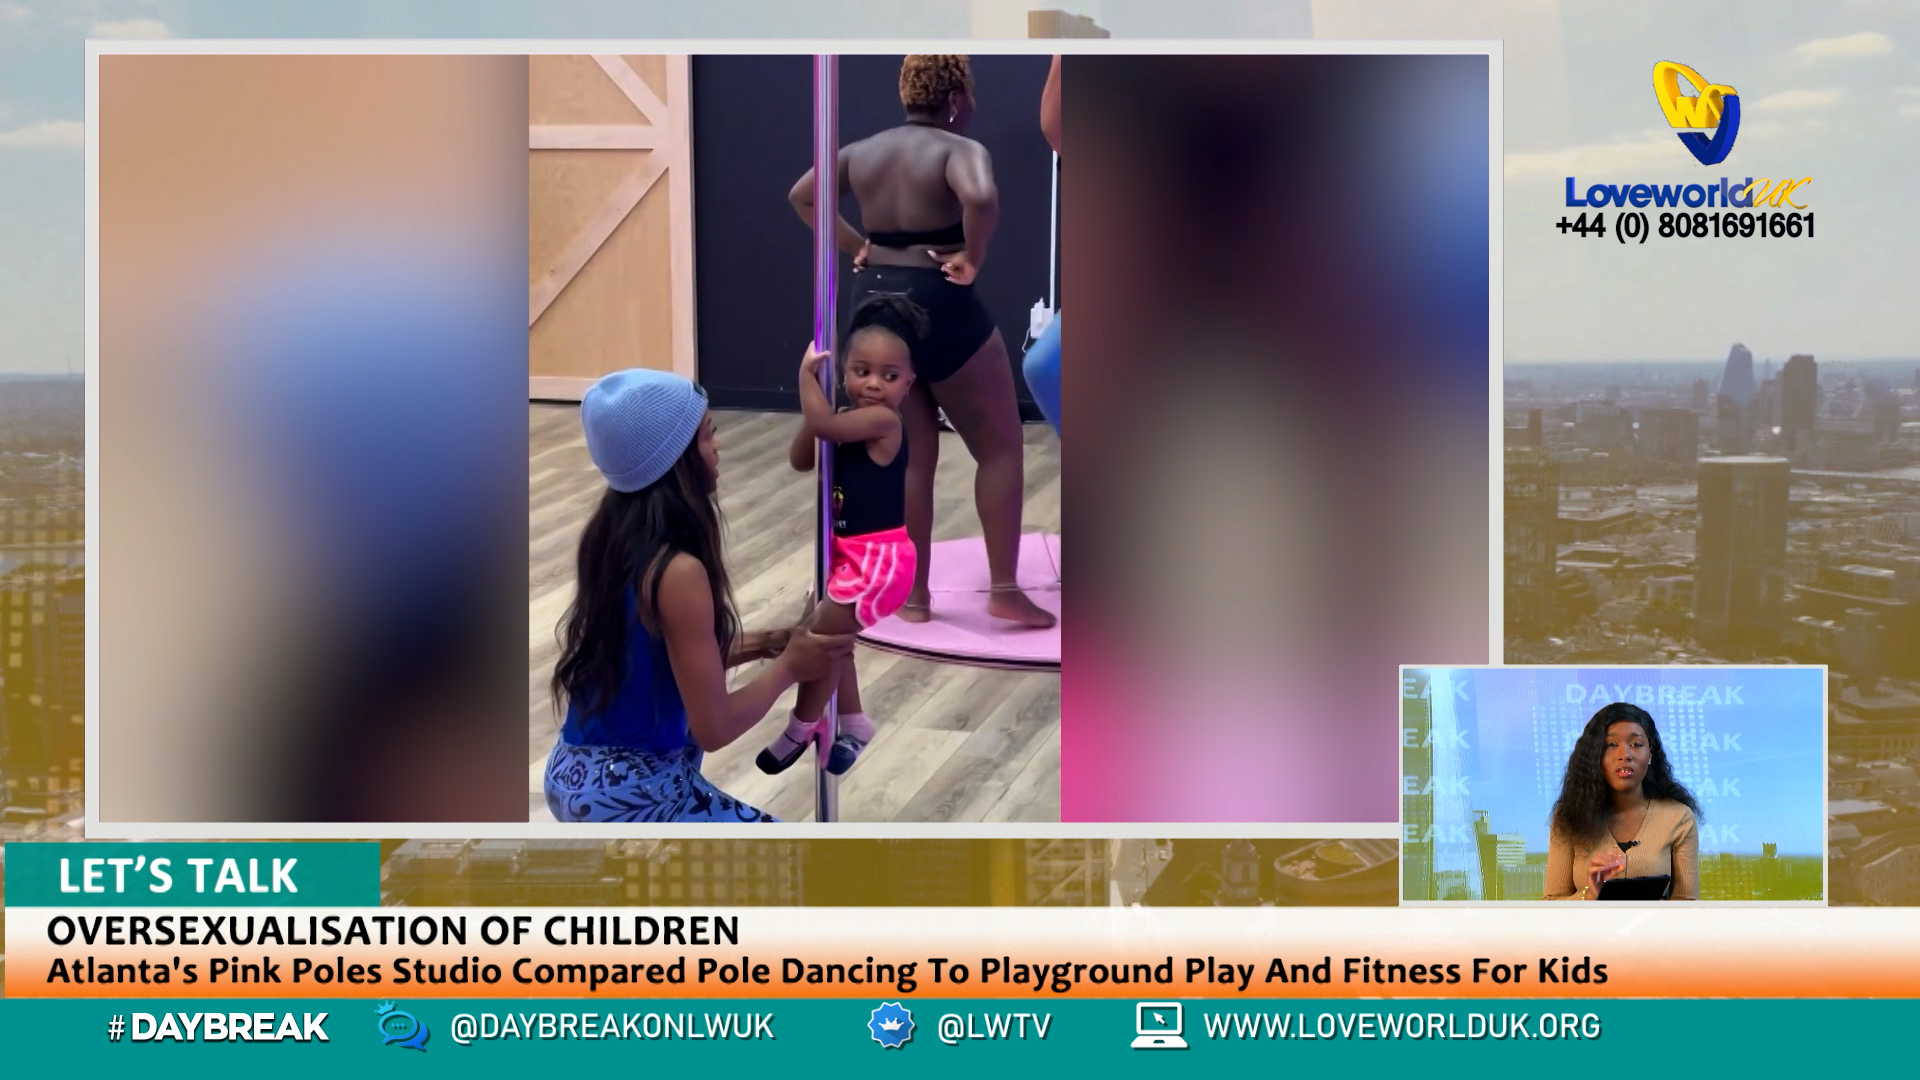 EP 13 - OVERSEXUALISATION OF CHILDREN - Atlanta's Pink Poles Studio Compared Pole Dancing To Playground Play And Fitness For Kids